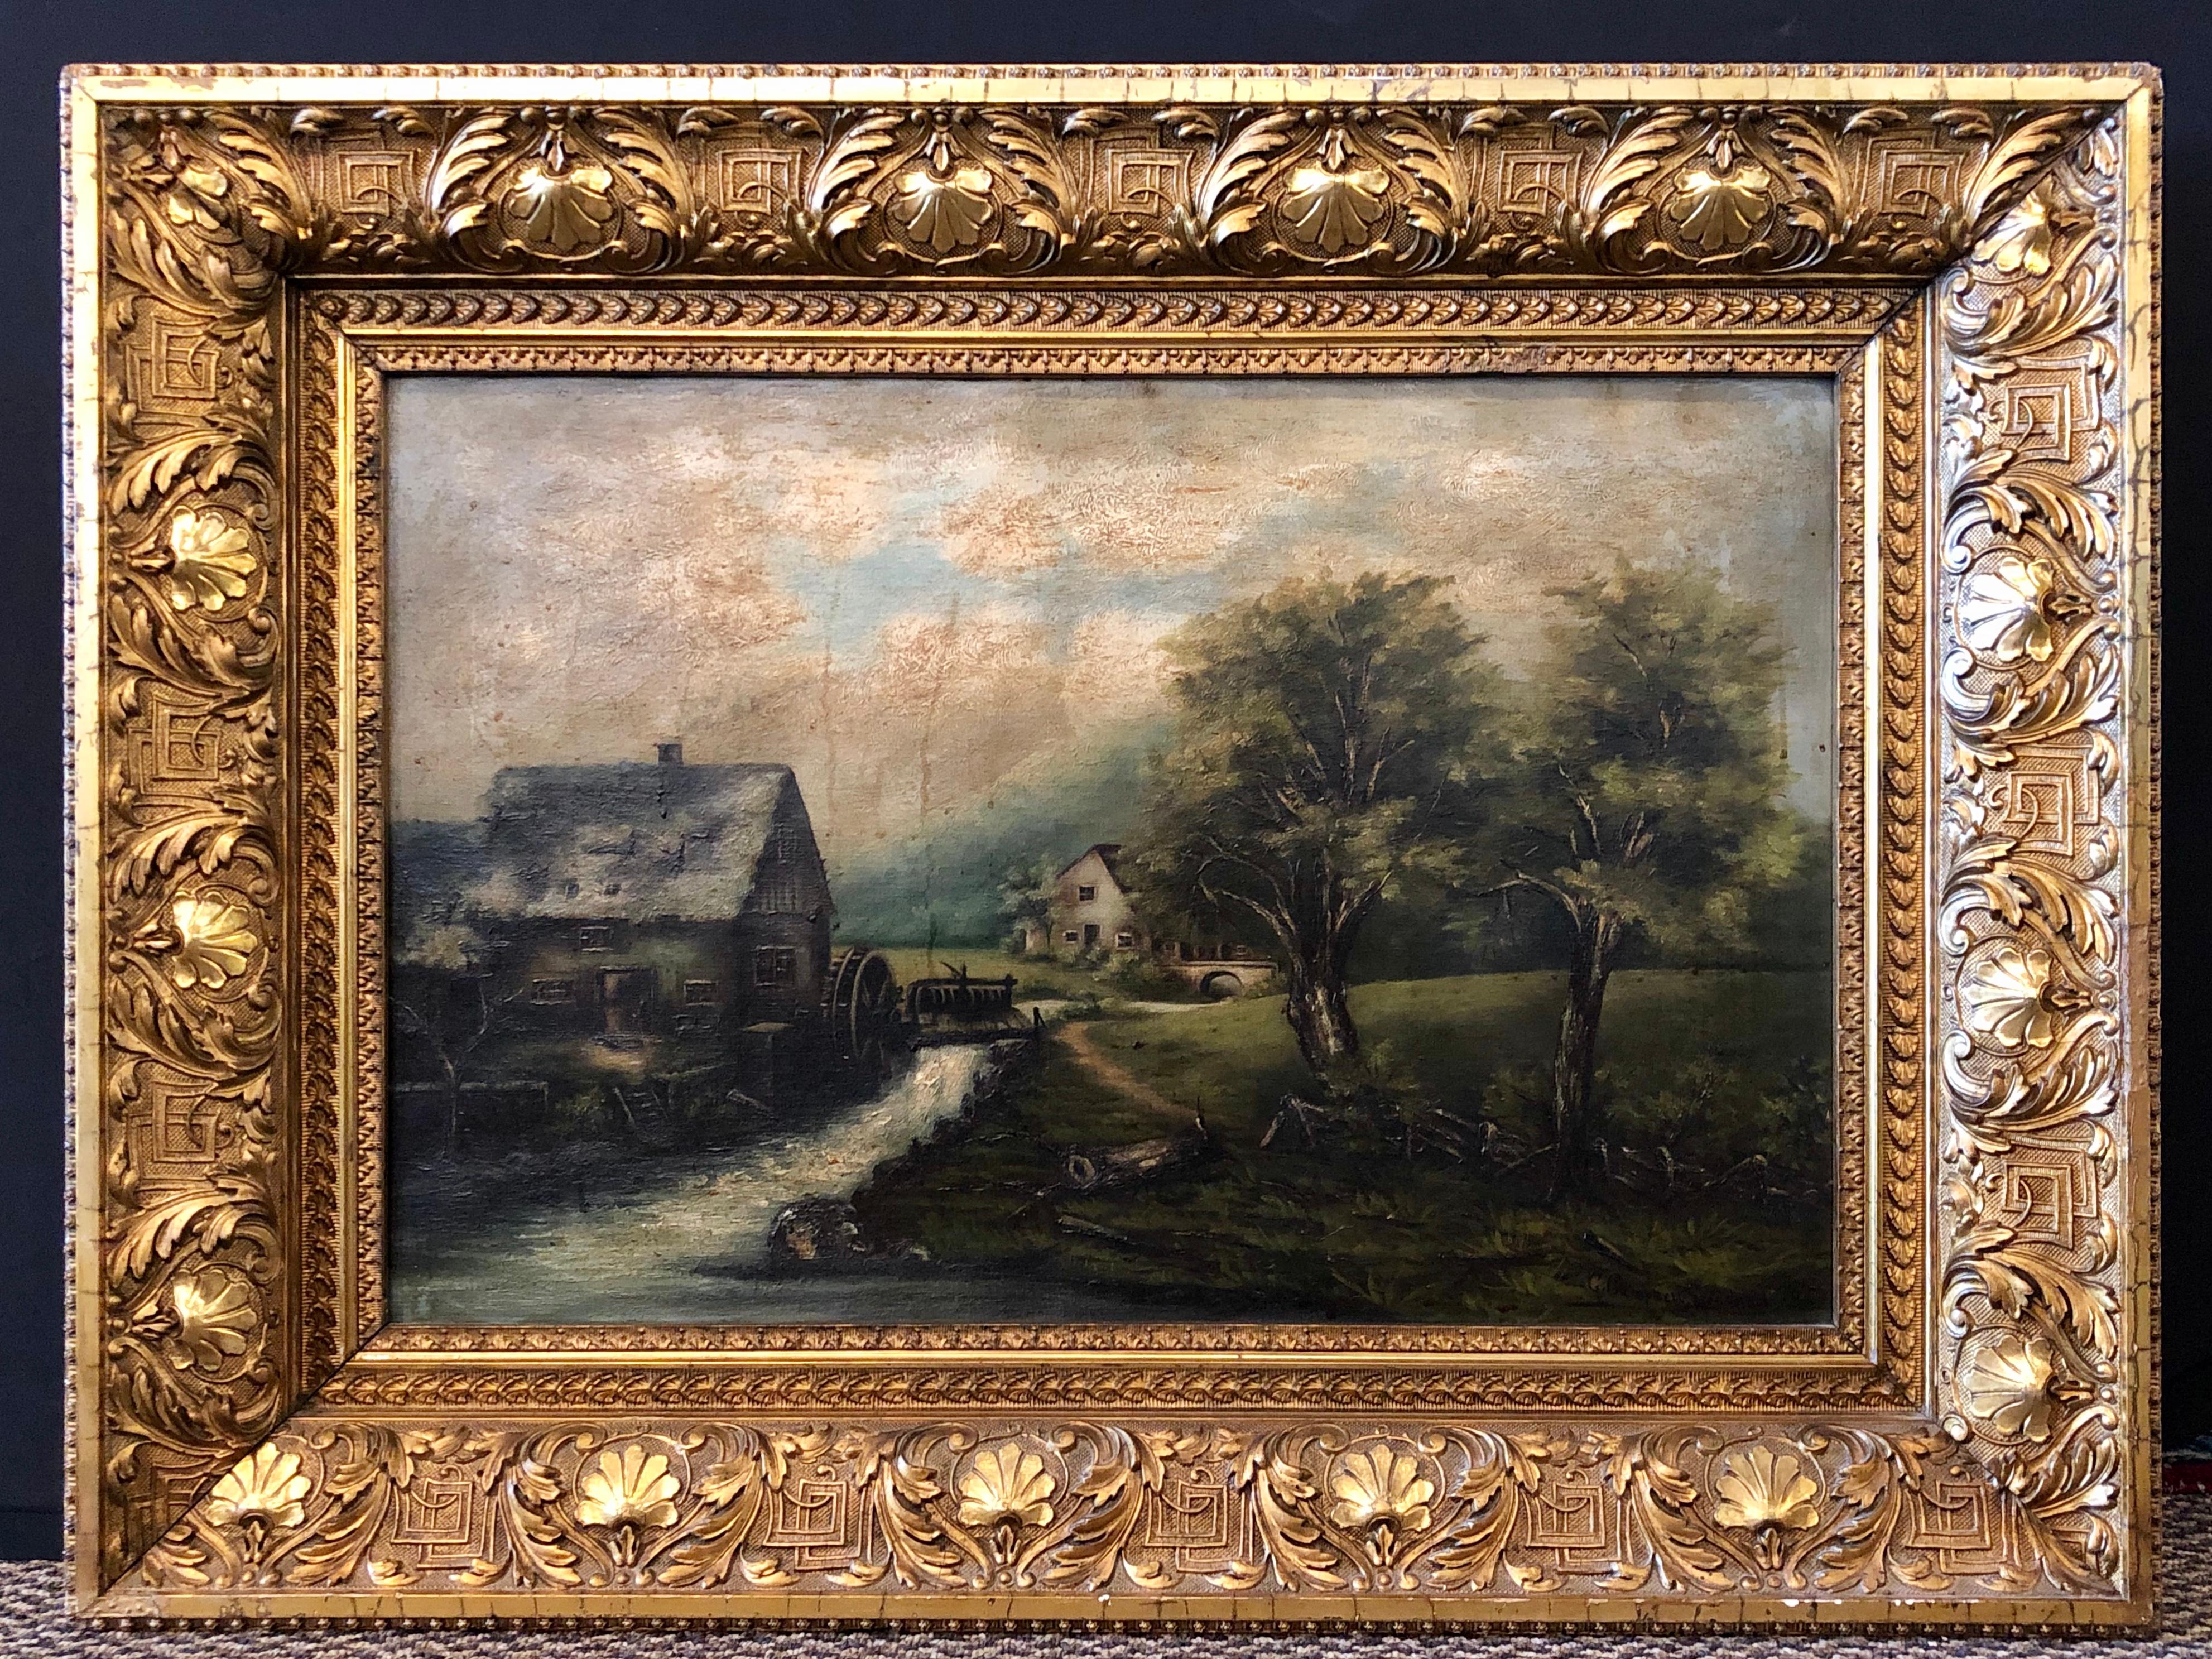 G. Campbell Stoddard oil on canvas. House with water mill in landscape. Signed lower right and dated 1896. In a fine gilt gesso frame. Measures: 17